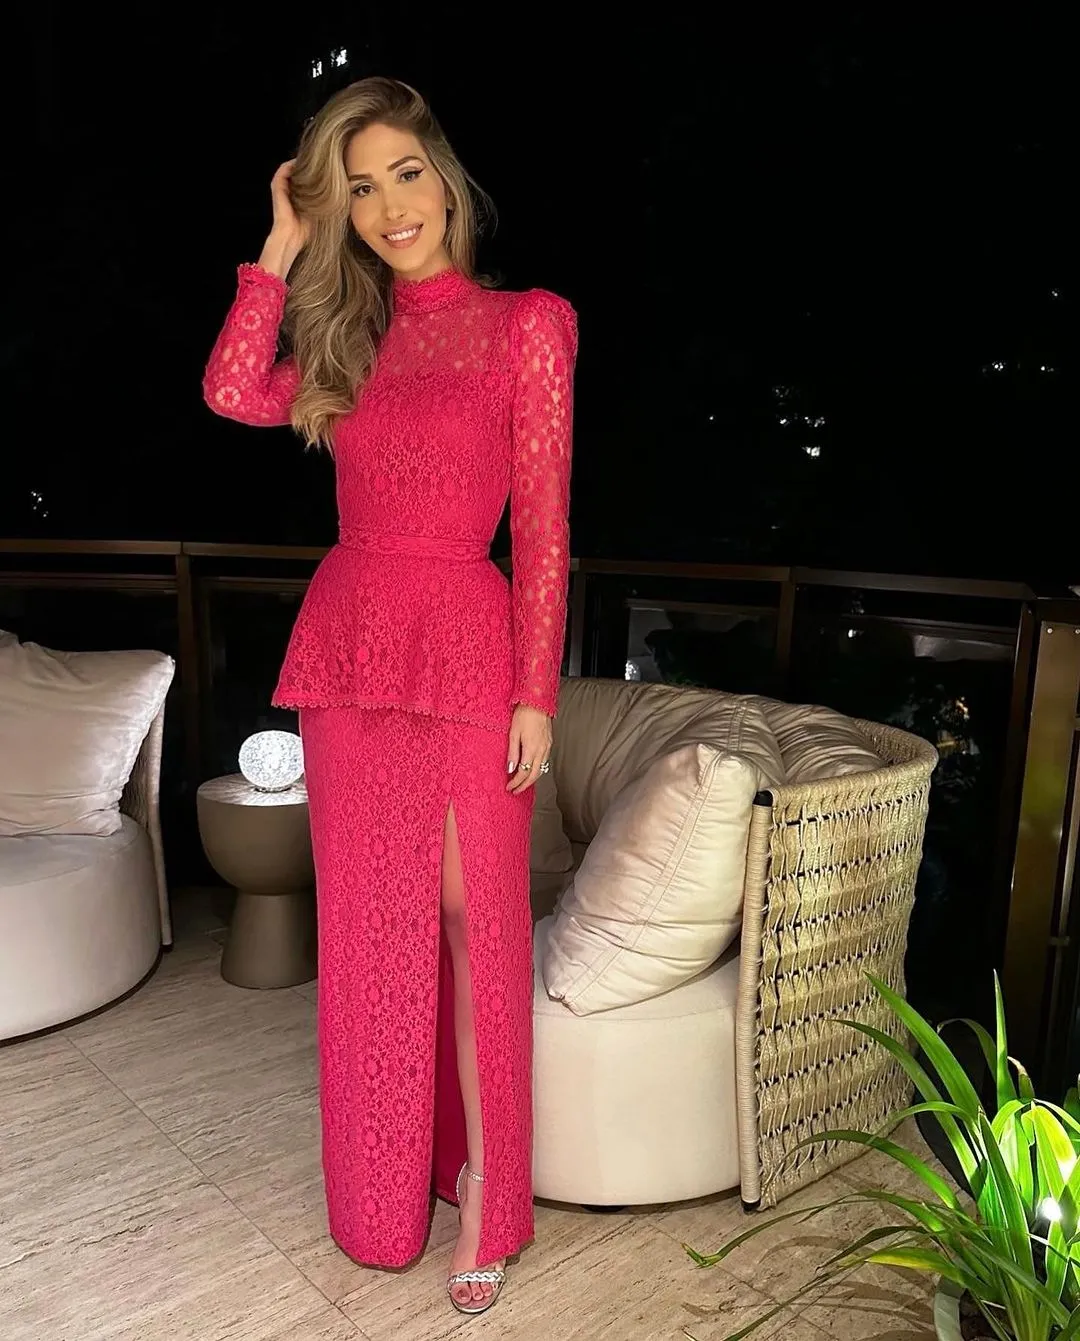 2023 Nov Aso Ebi Arabic Fuchsia Sheath Mother Of The Bride Dresses Lace Evening Prom Formal Party Birthday Celebrity Mother Of Groom Gowns Dress ZJT019